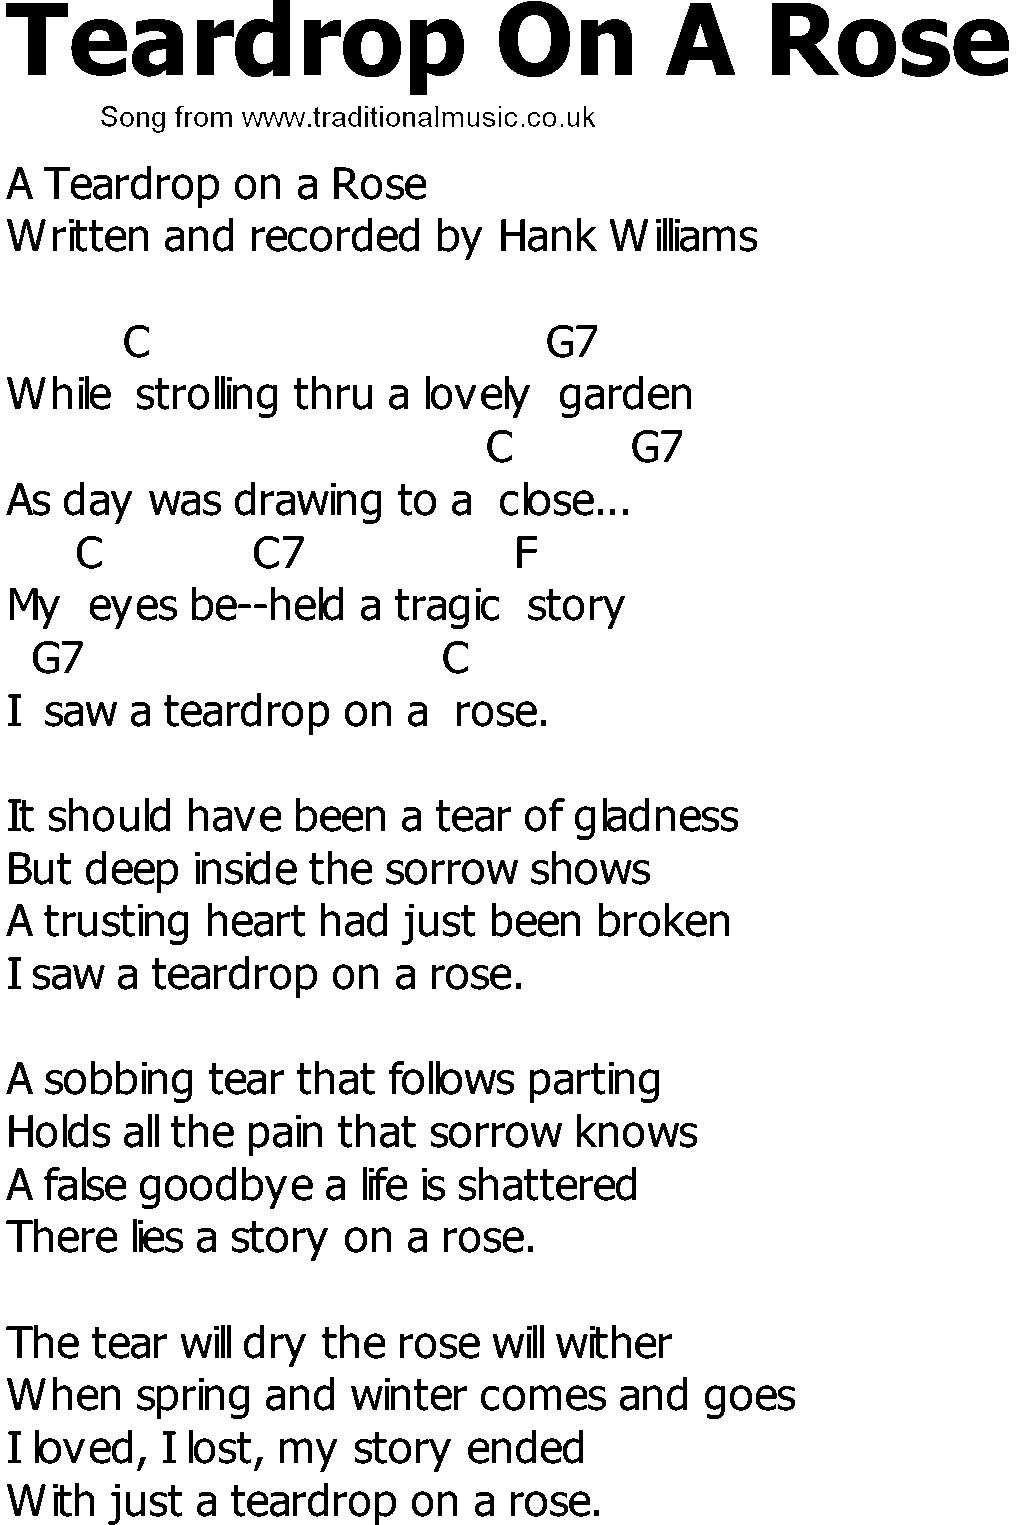 Old Country song lyrics with chords - Teardrop On A Rose